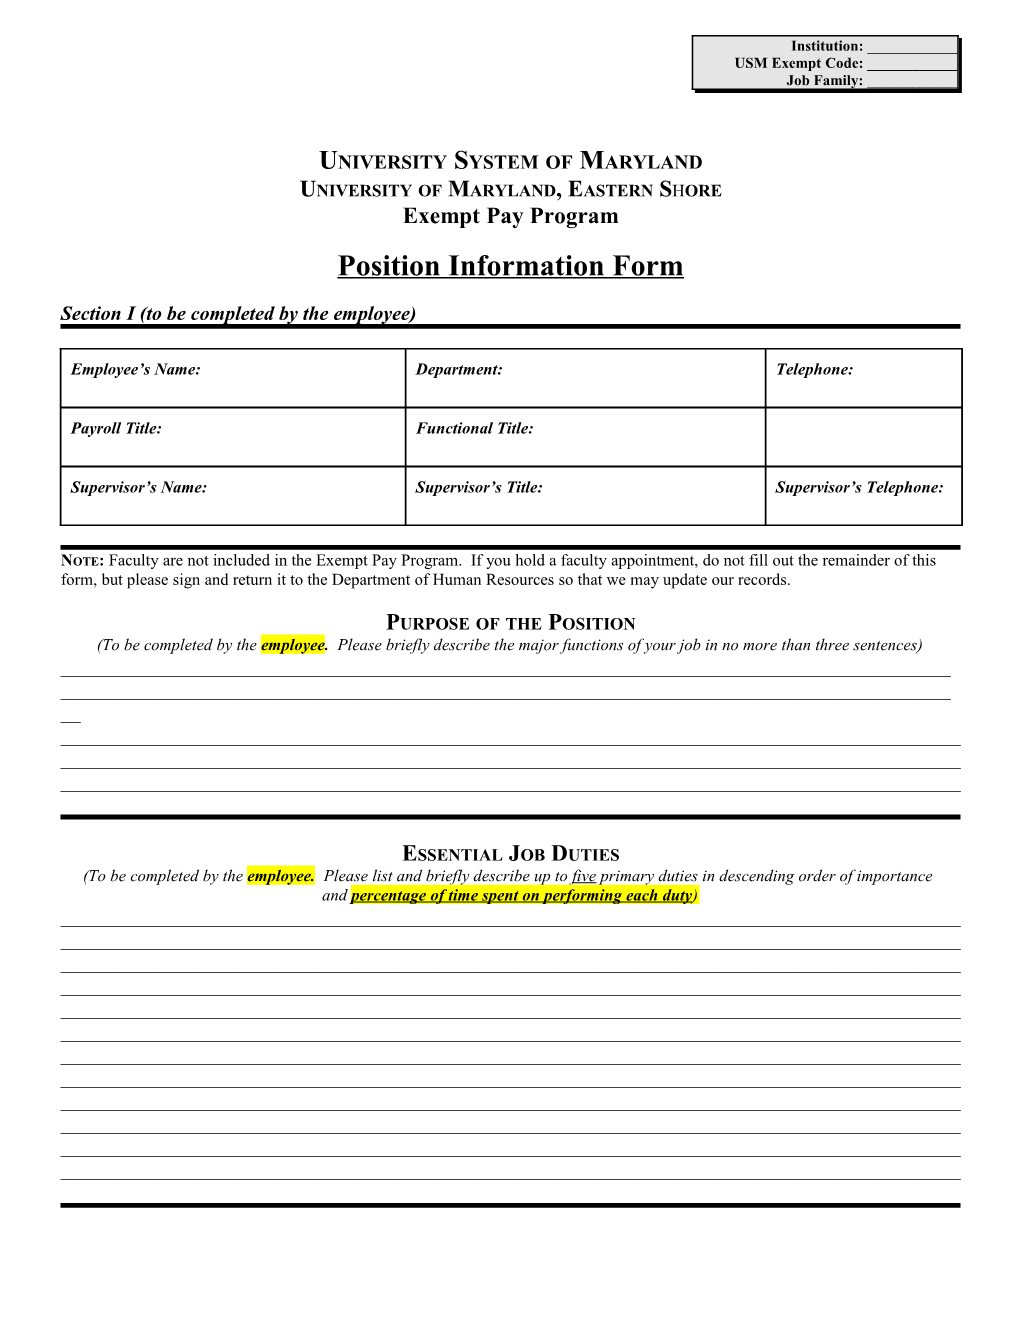 Position Information Form - Exempt - 2010 (WORD)